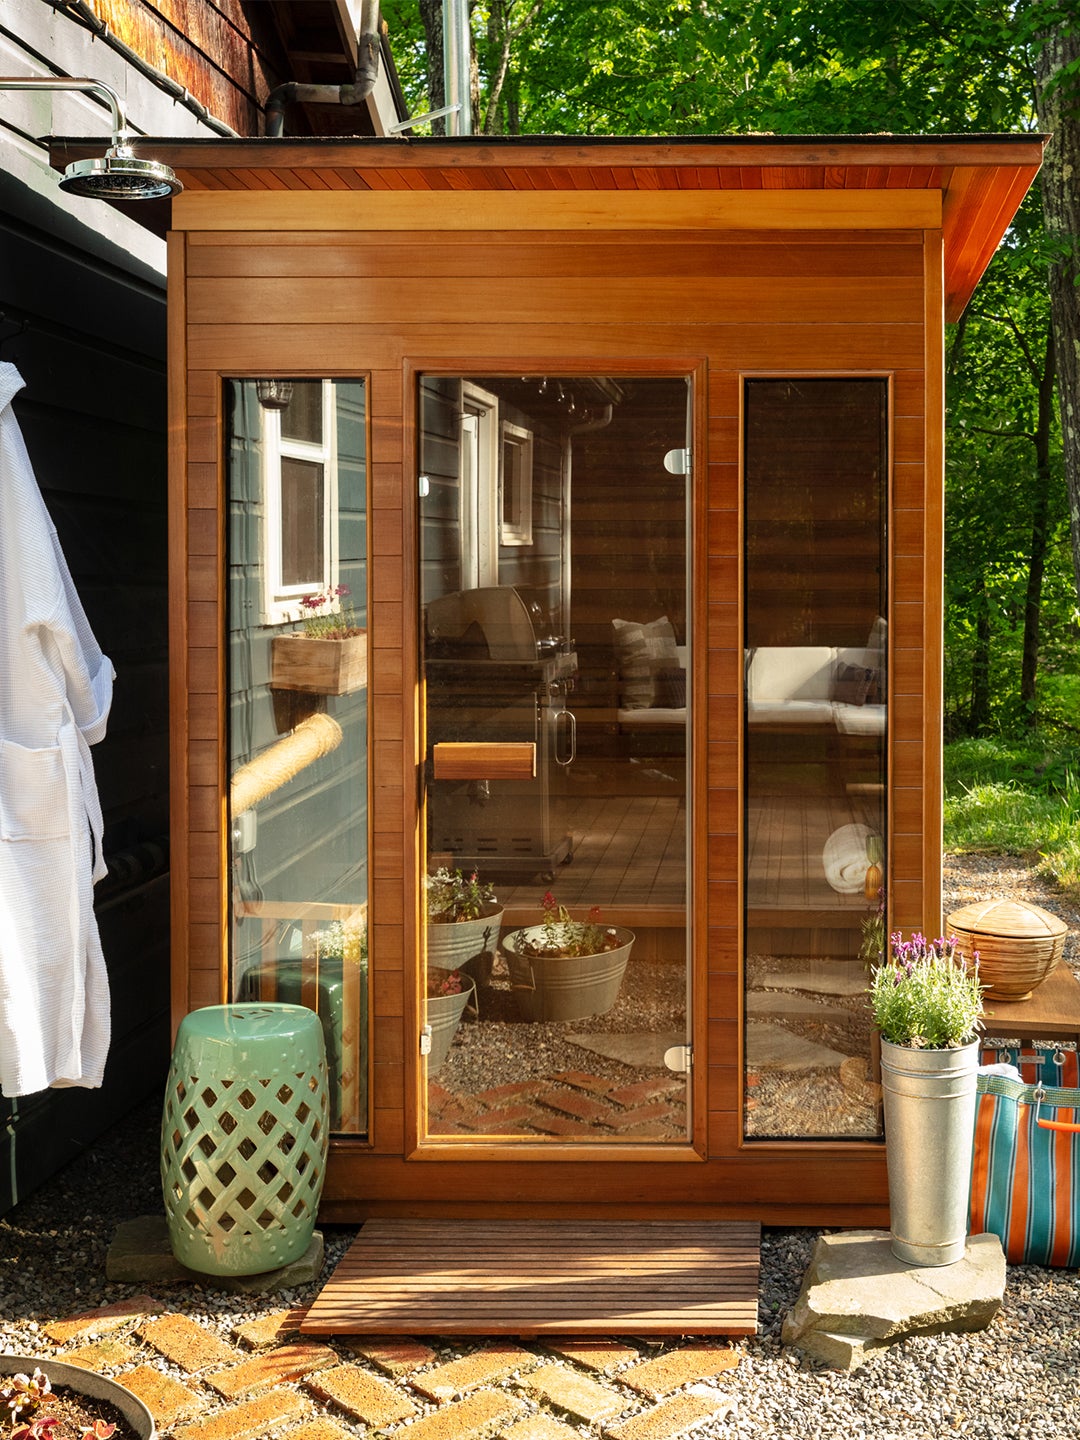 Even Small Space Dwellers Can Carve Out a Spot for the Best Infrared Saunas